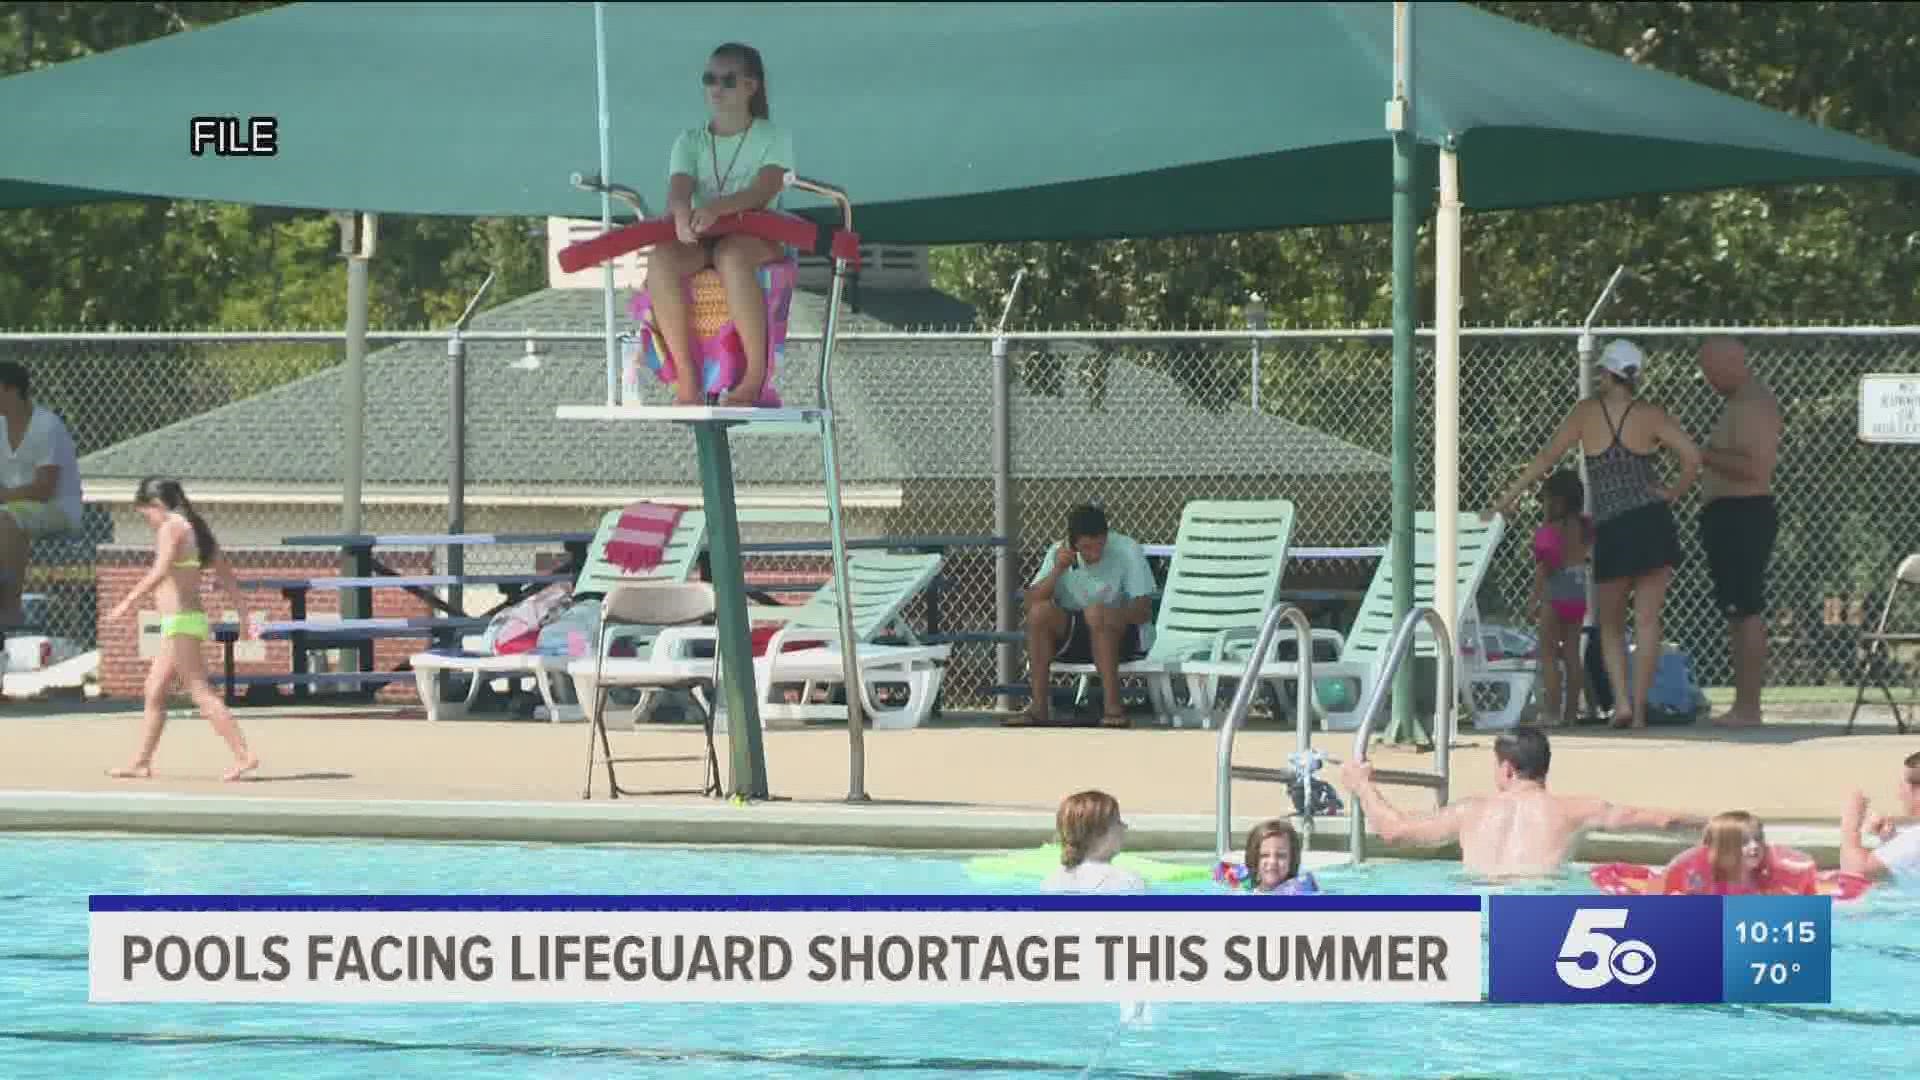 According to the American Lifeguard Association, up to half of all pools in the country are in need of lifeguards.